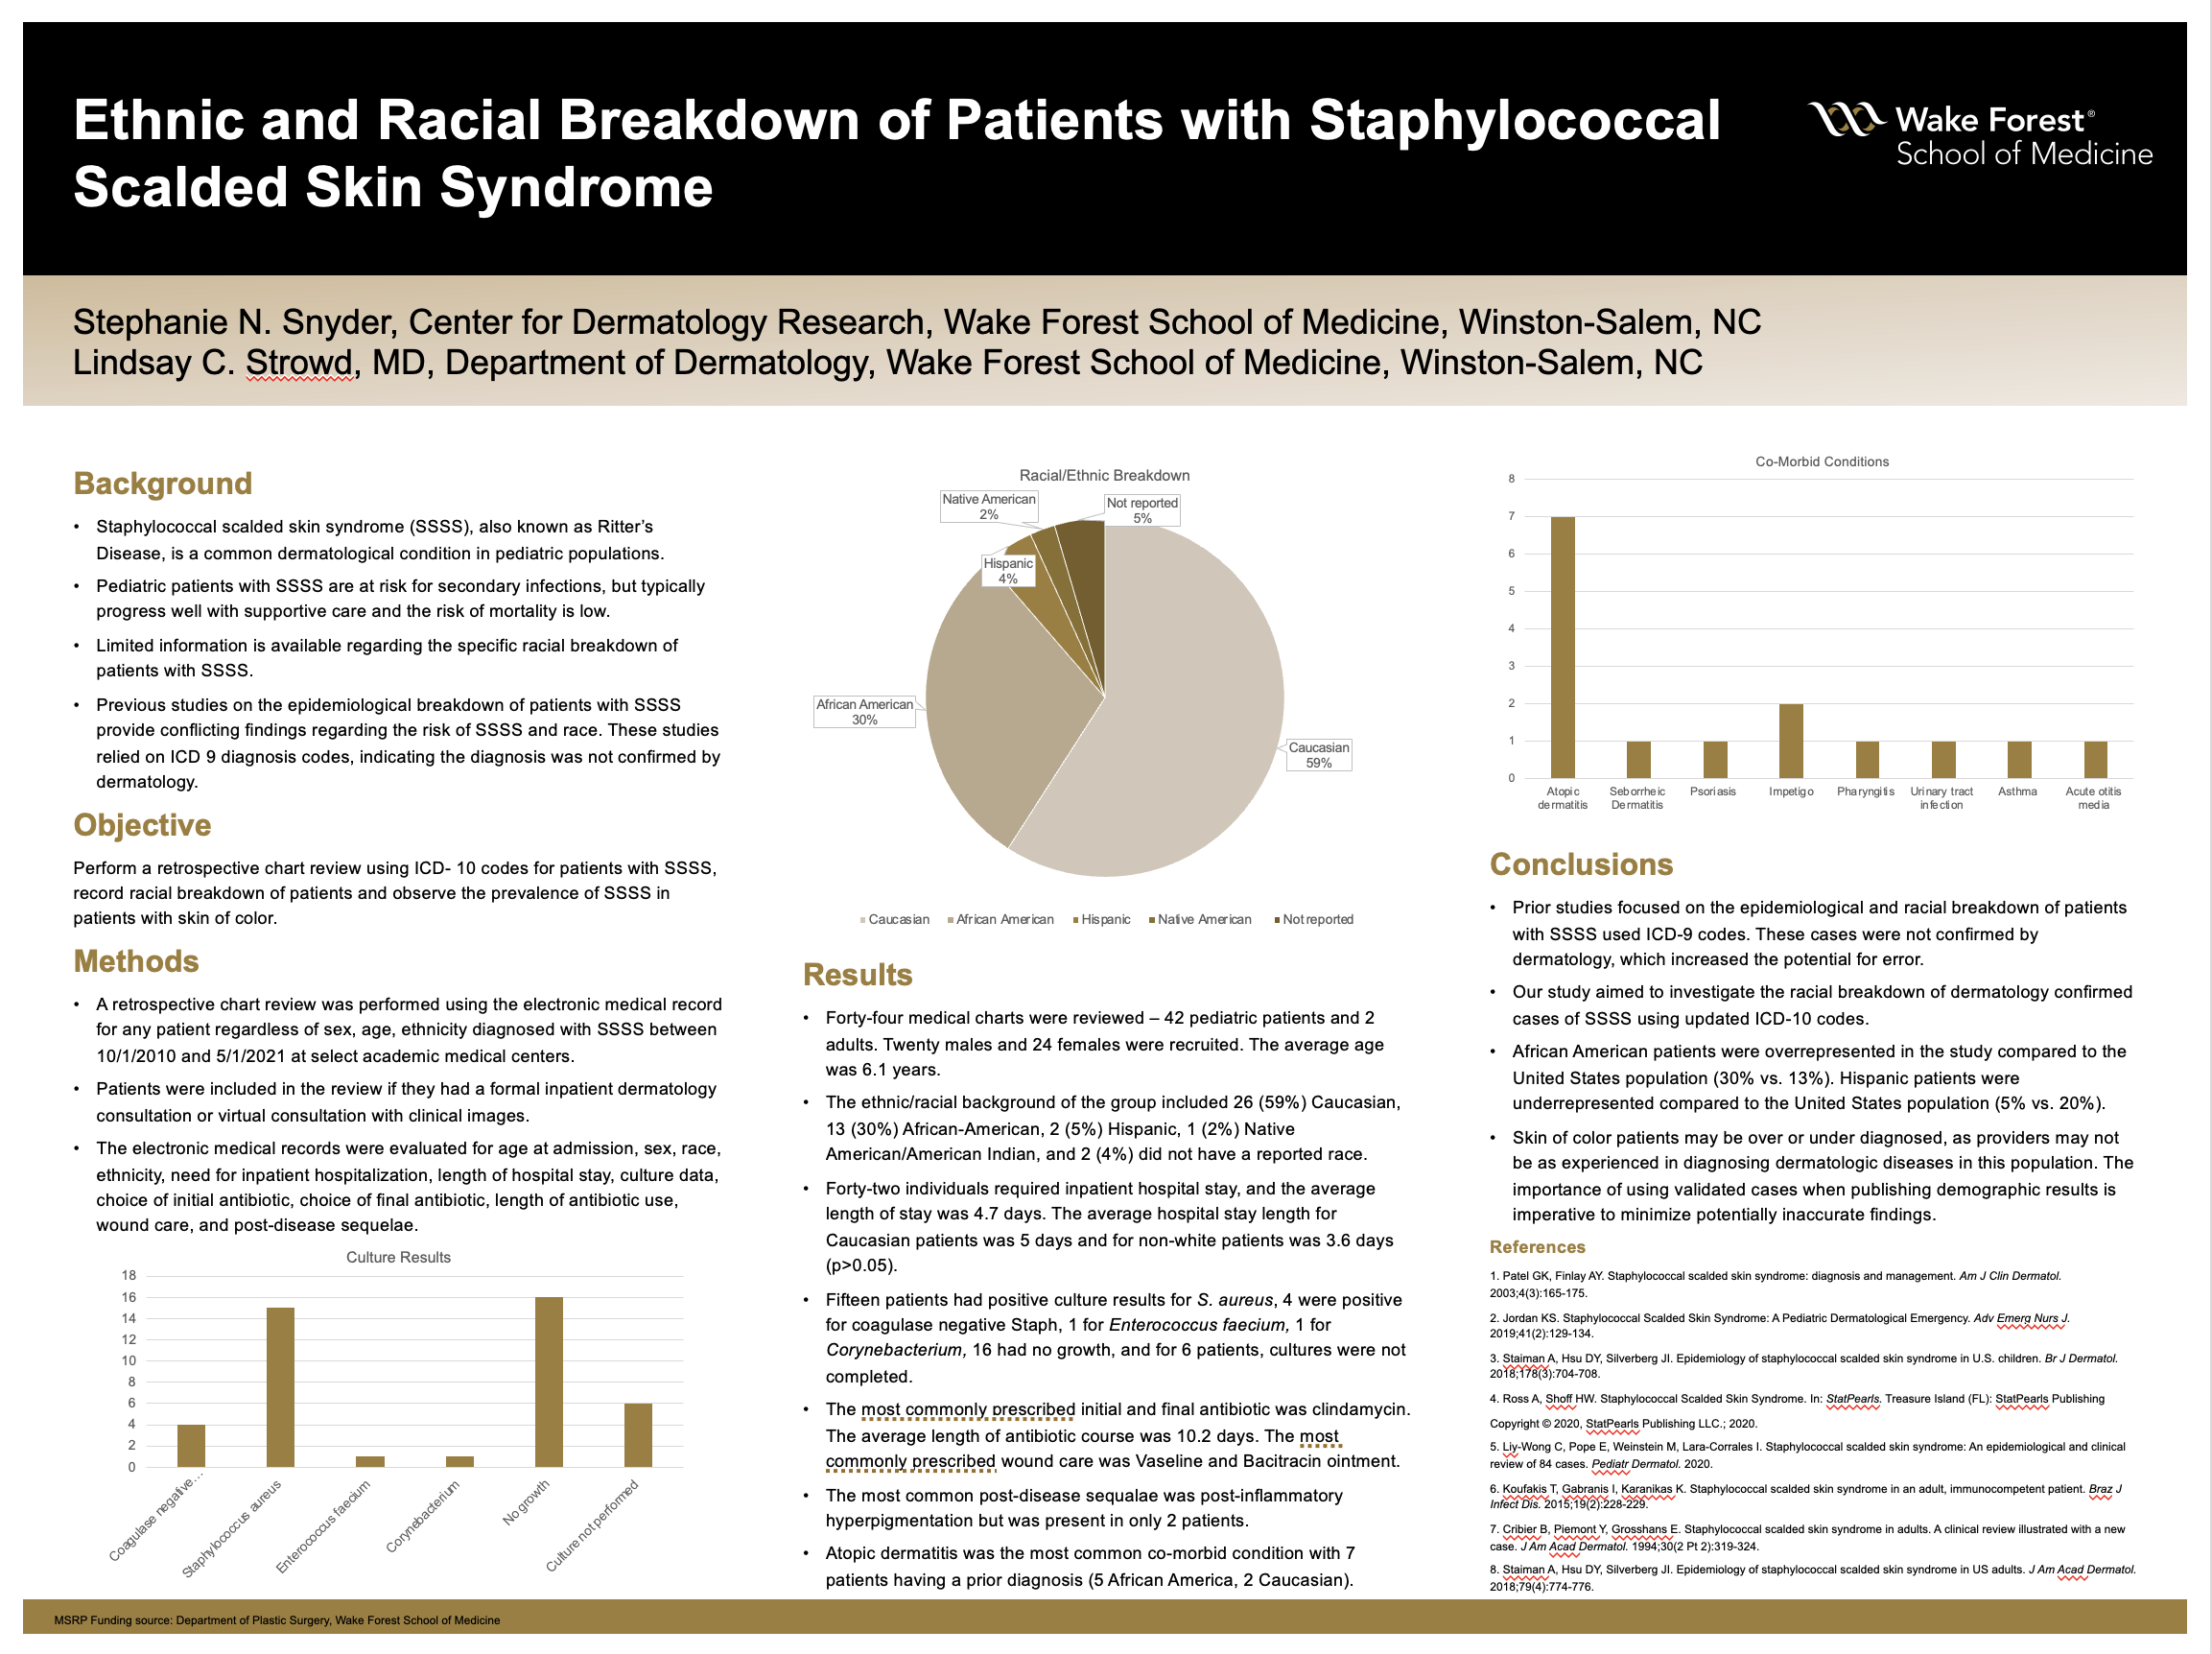 Showcase Image for Ethnic and Racial Breakdown of Patients with Staphylococcal Scalded Skin Syndrome 